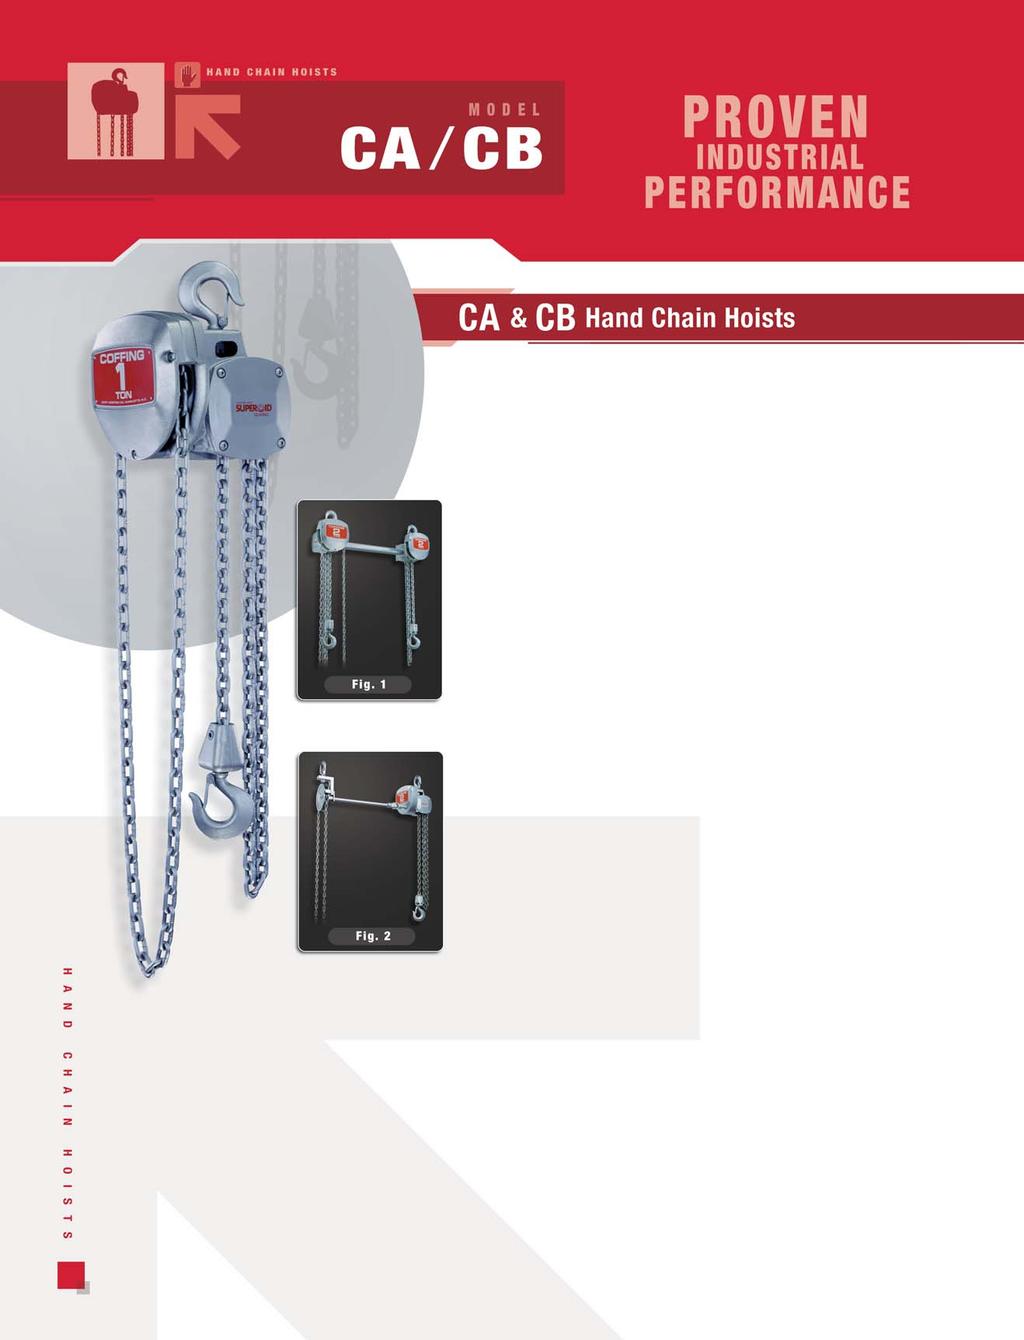 COFFING CA & CB Models - Hand chain hoists set the standard for performance and durability.